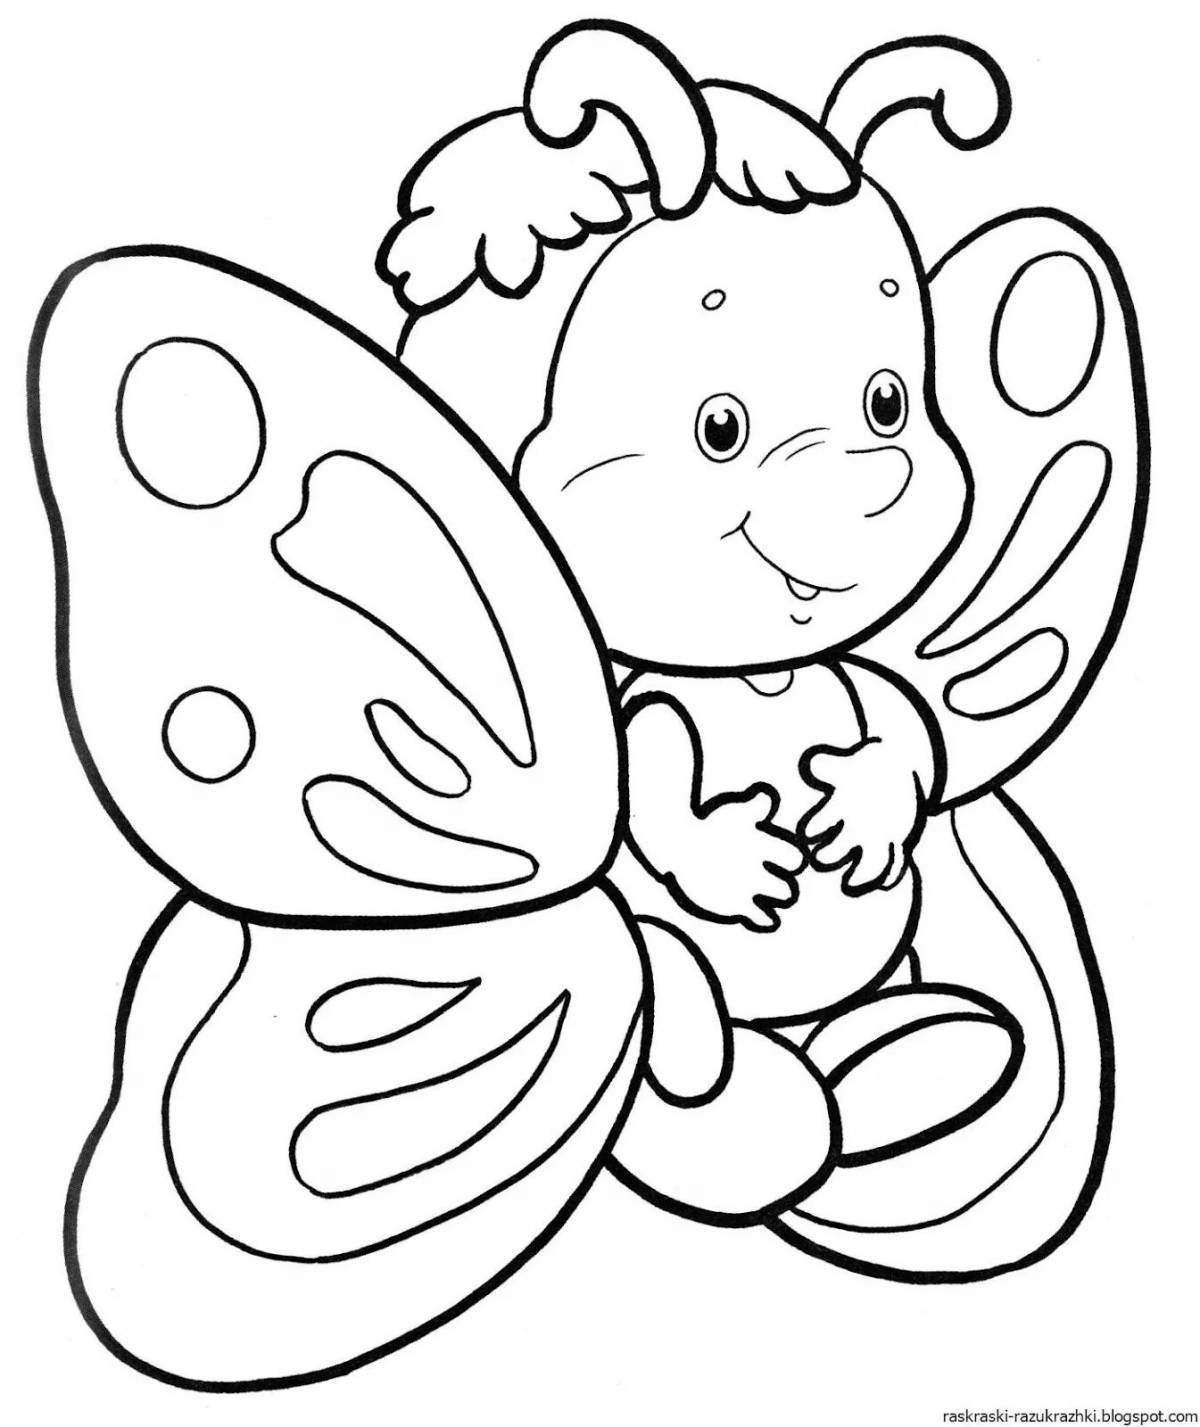 Playful butterfly coloring book for 4-5 year olds